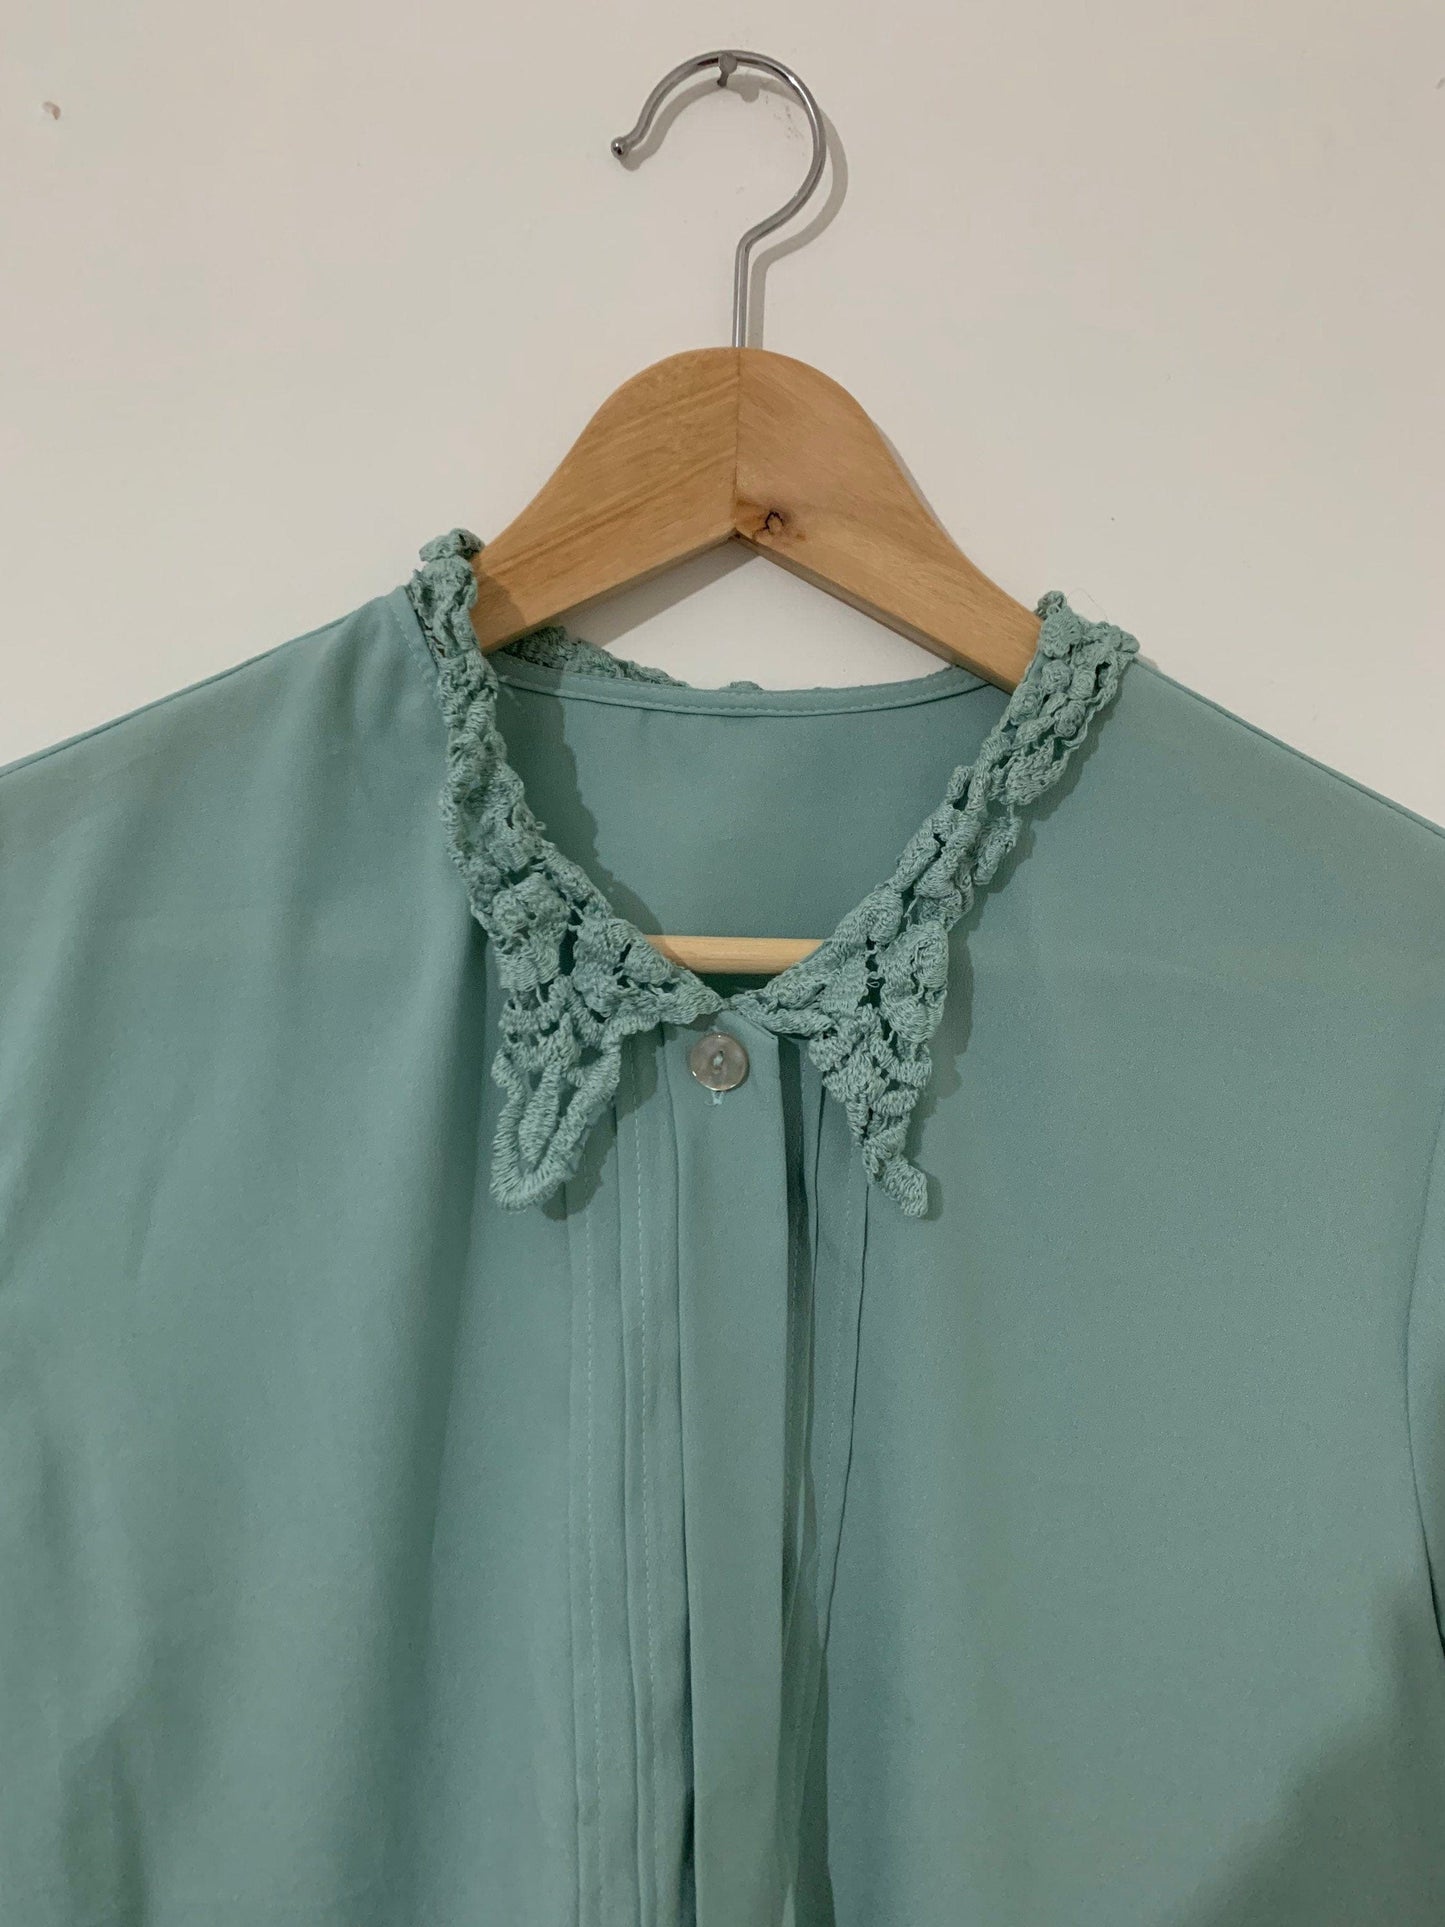 Vintage Green Blouse with Lace Collar Long Sleeves - Duck Egg Blue